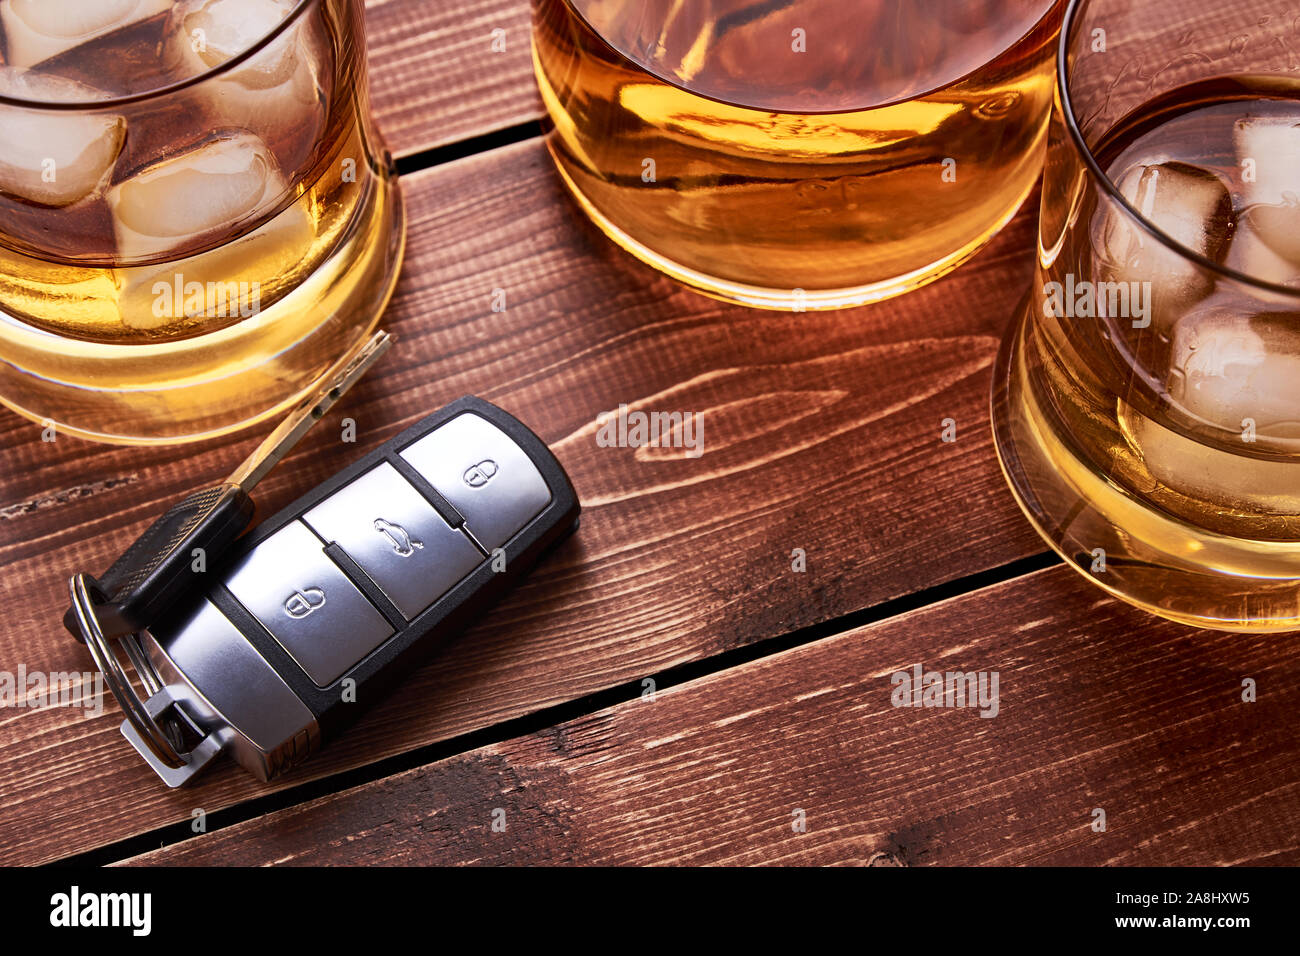 Modern car keys on wooden table top in bar. Glass and bottle of whiskey or other alcohol with ice. Suitable for the article on drunk driving. Stock Photo